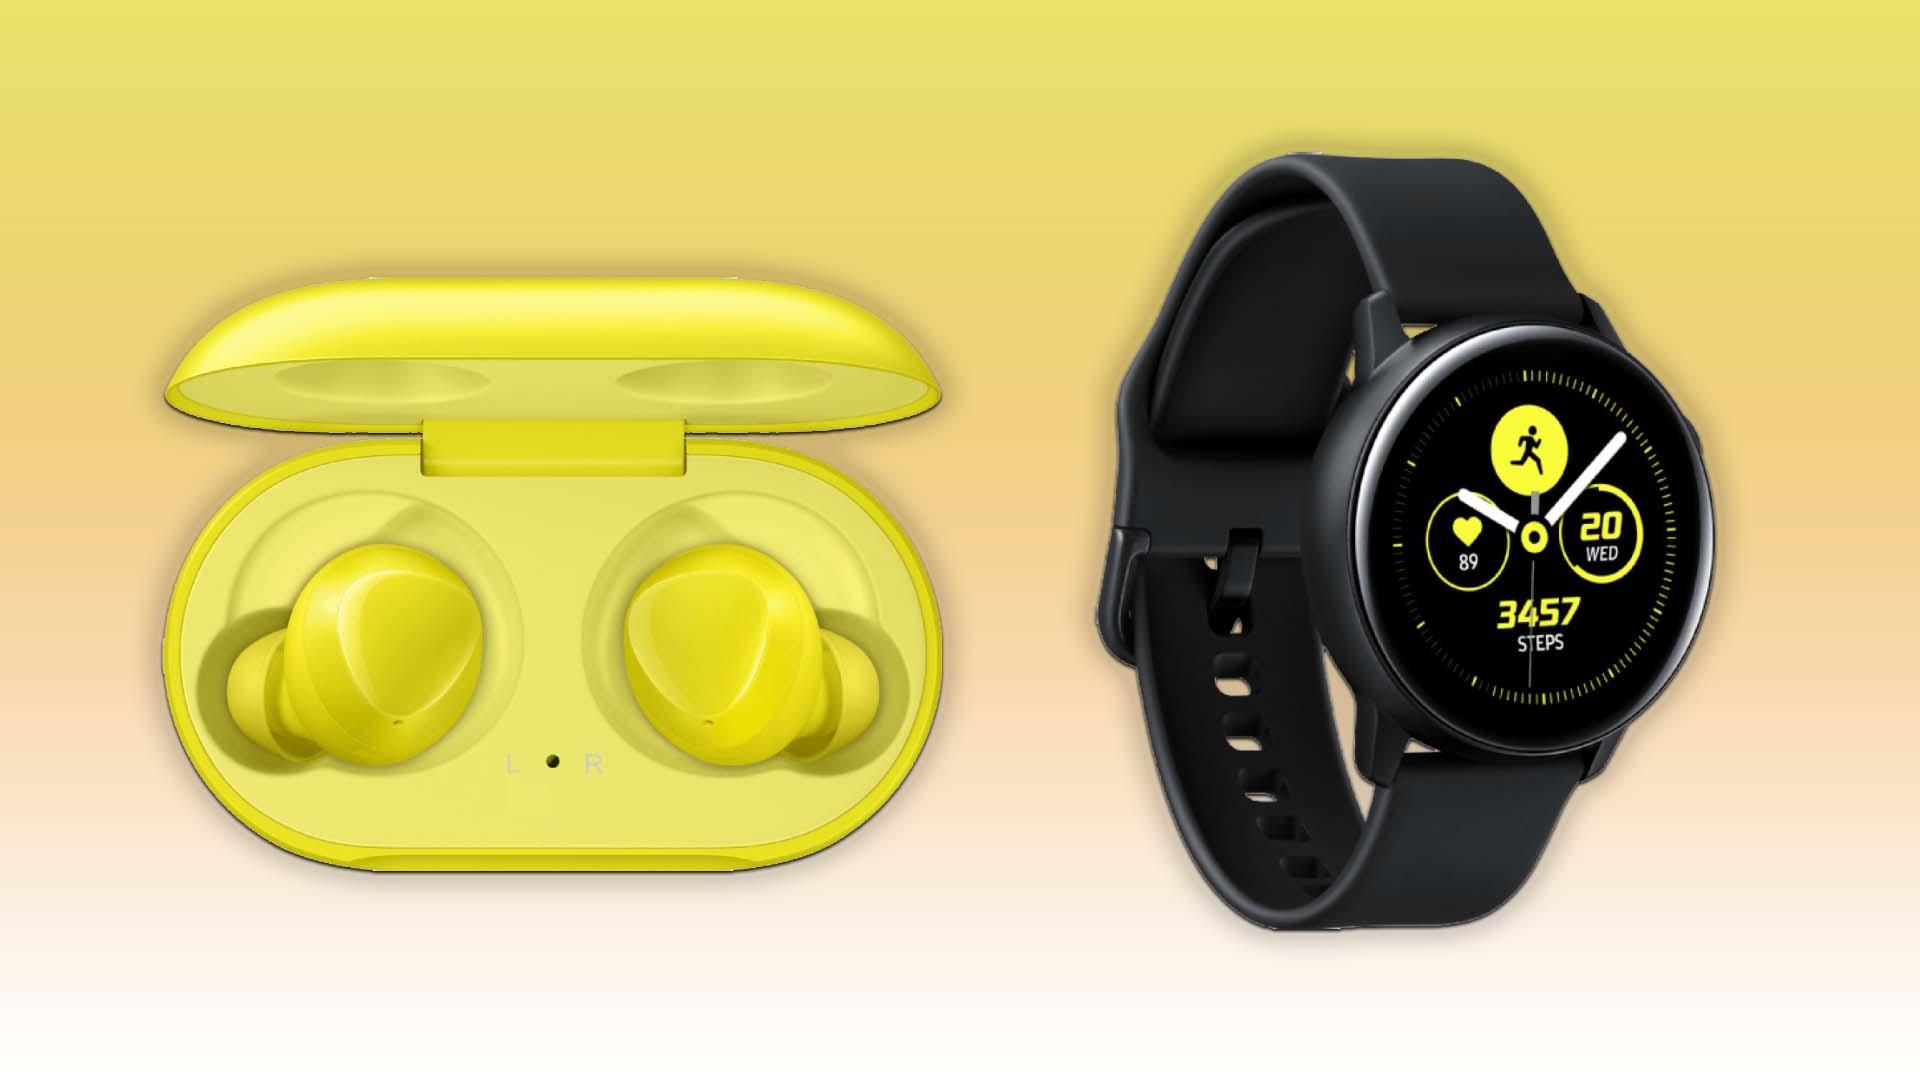 The Samsung Galaxy Watch Active and Galaxy Buds Bunch of Wallpaper